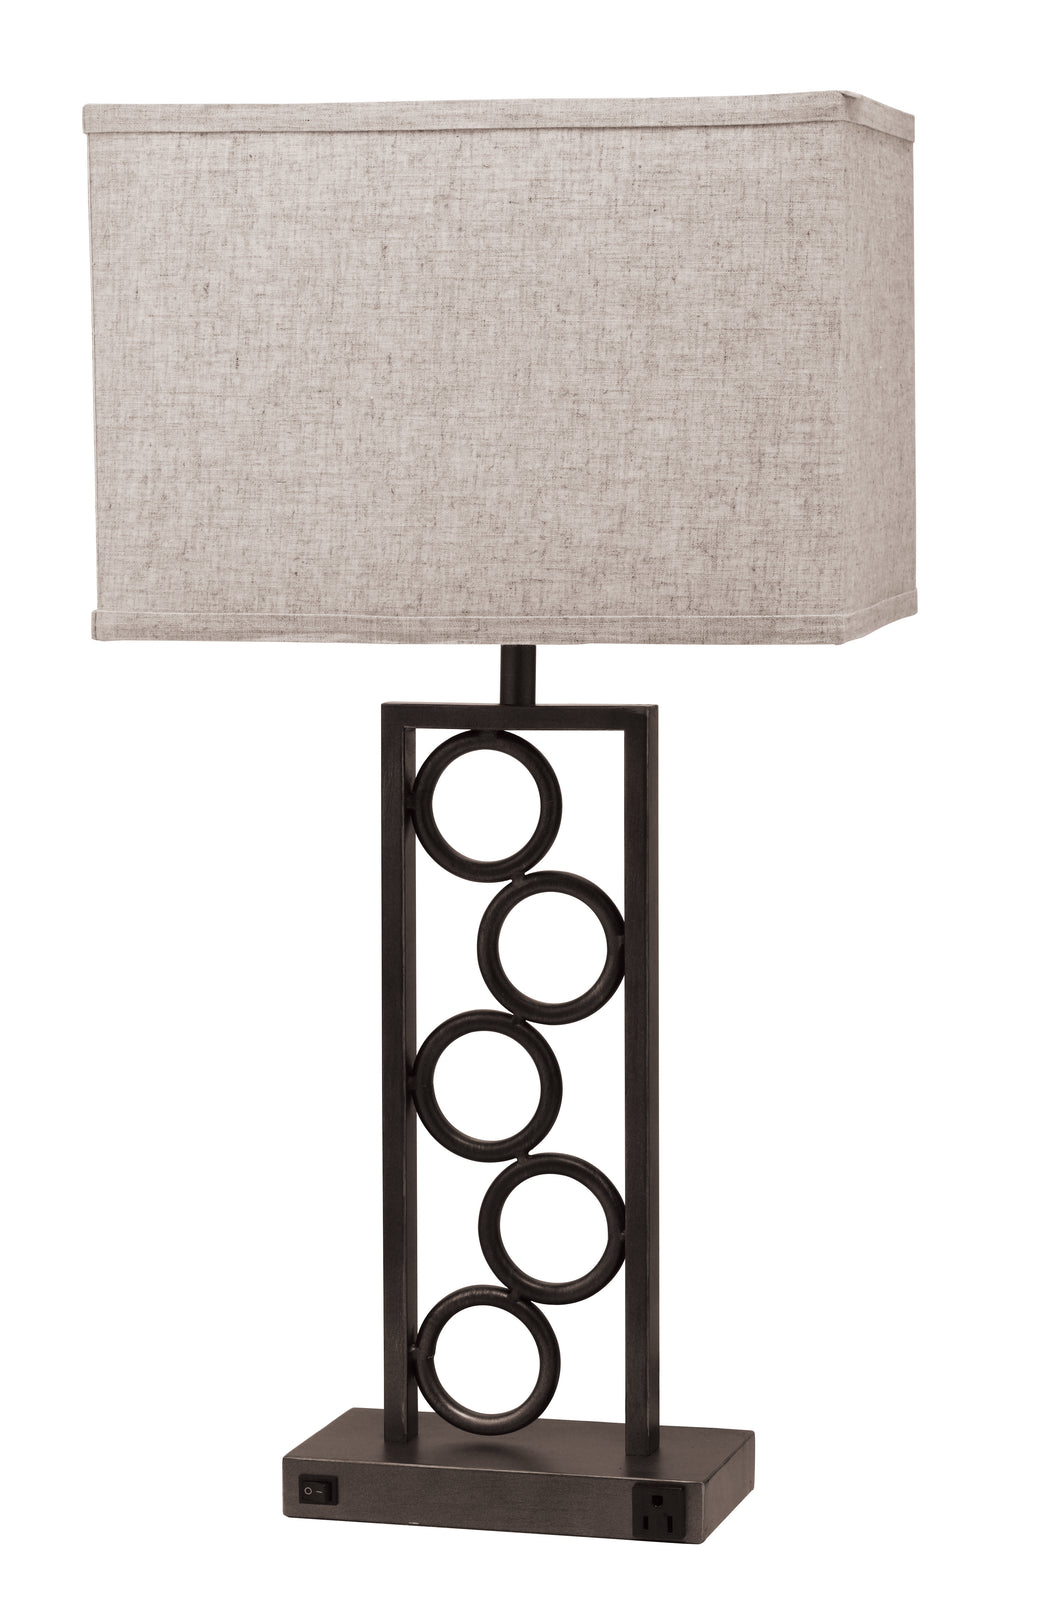 STACK CIRCLE LAMP WITH OUTLET